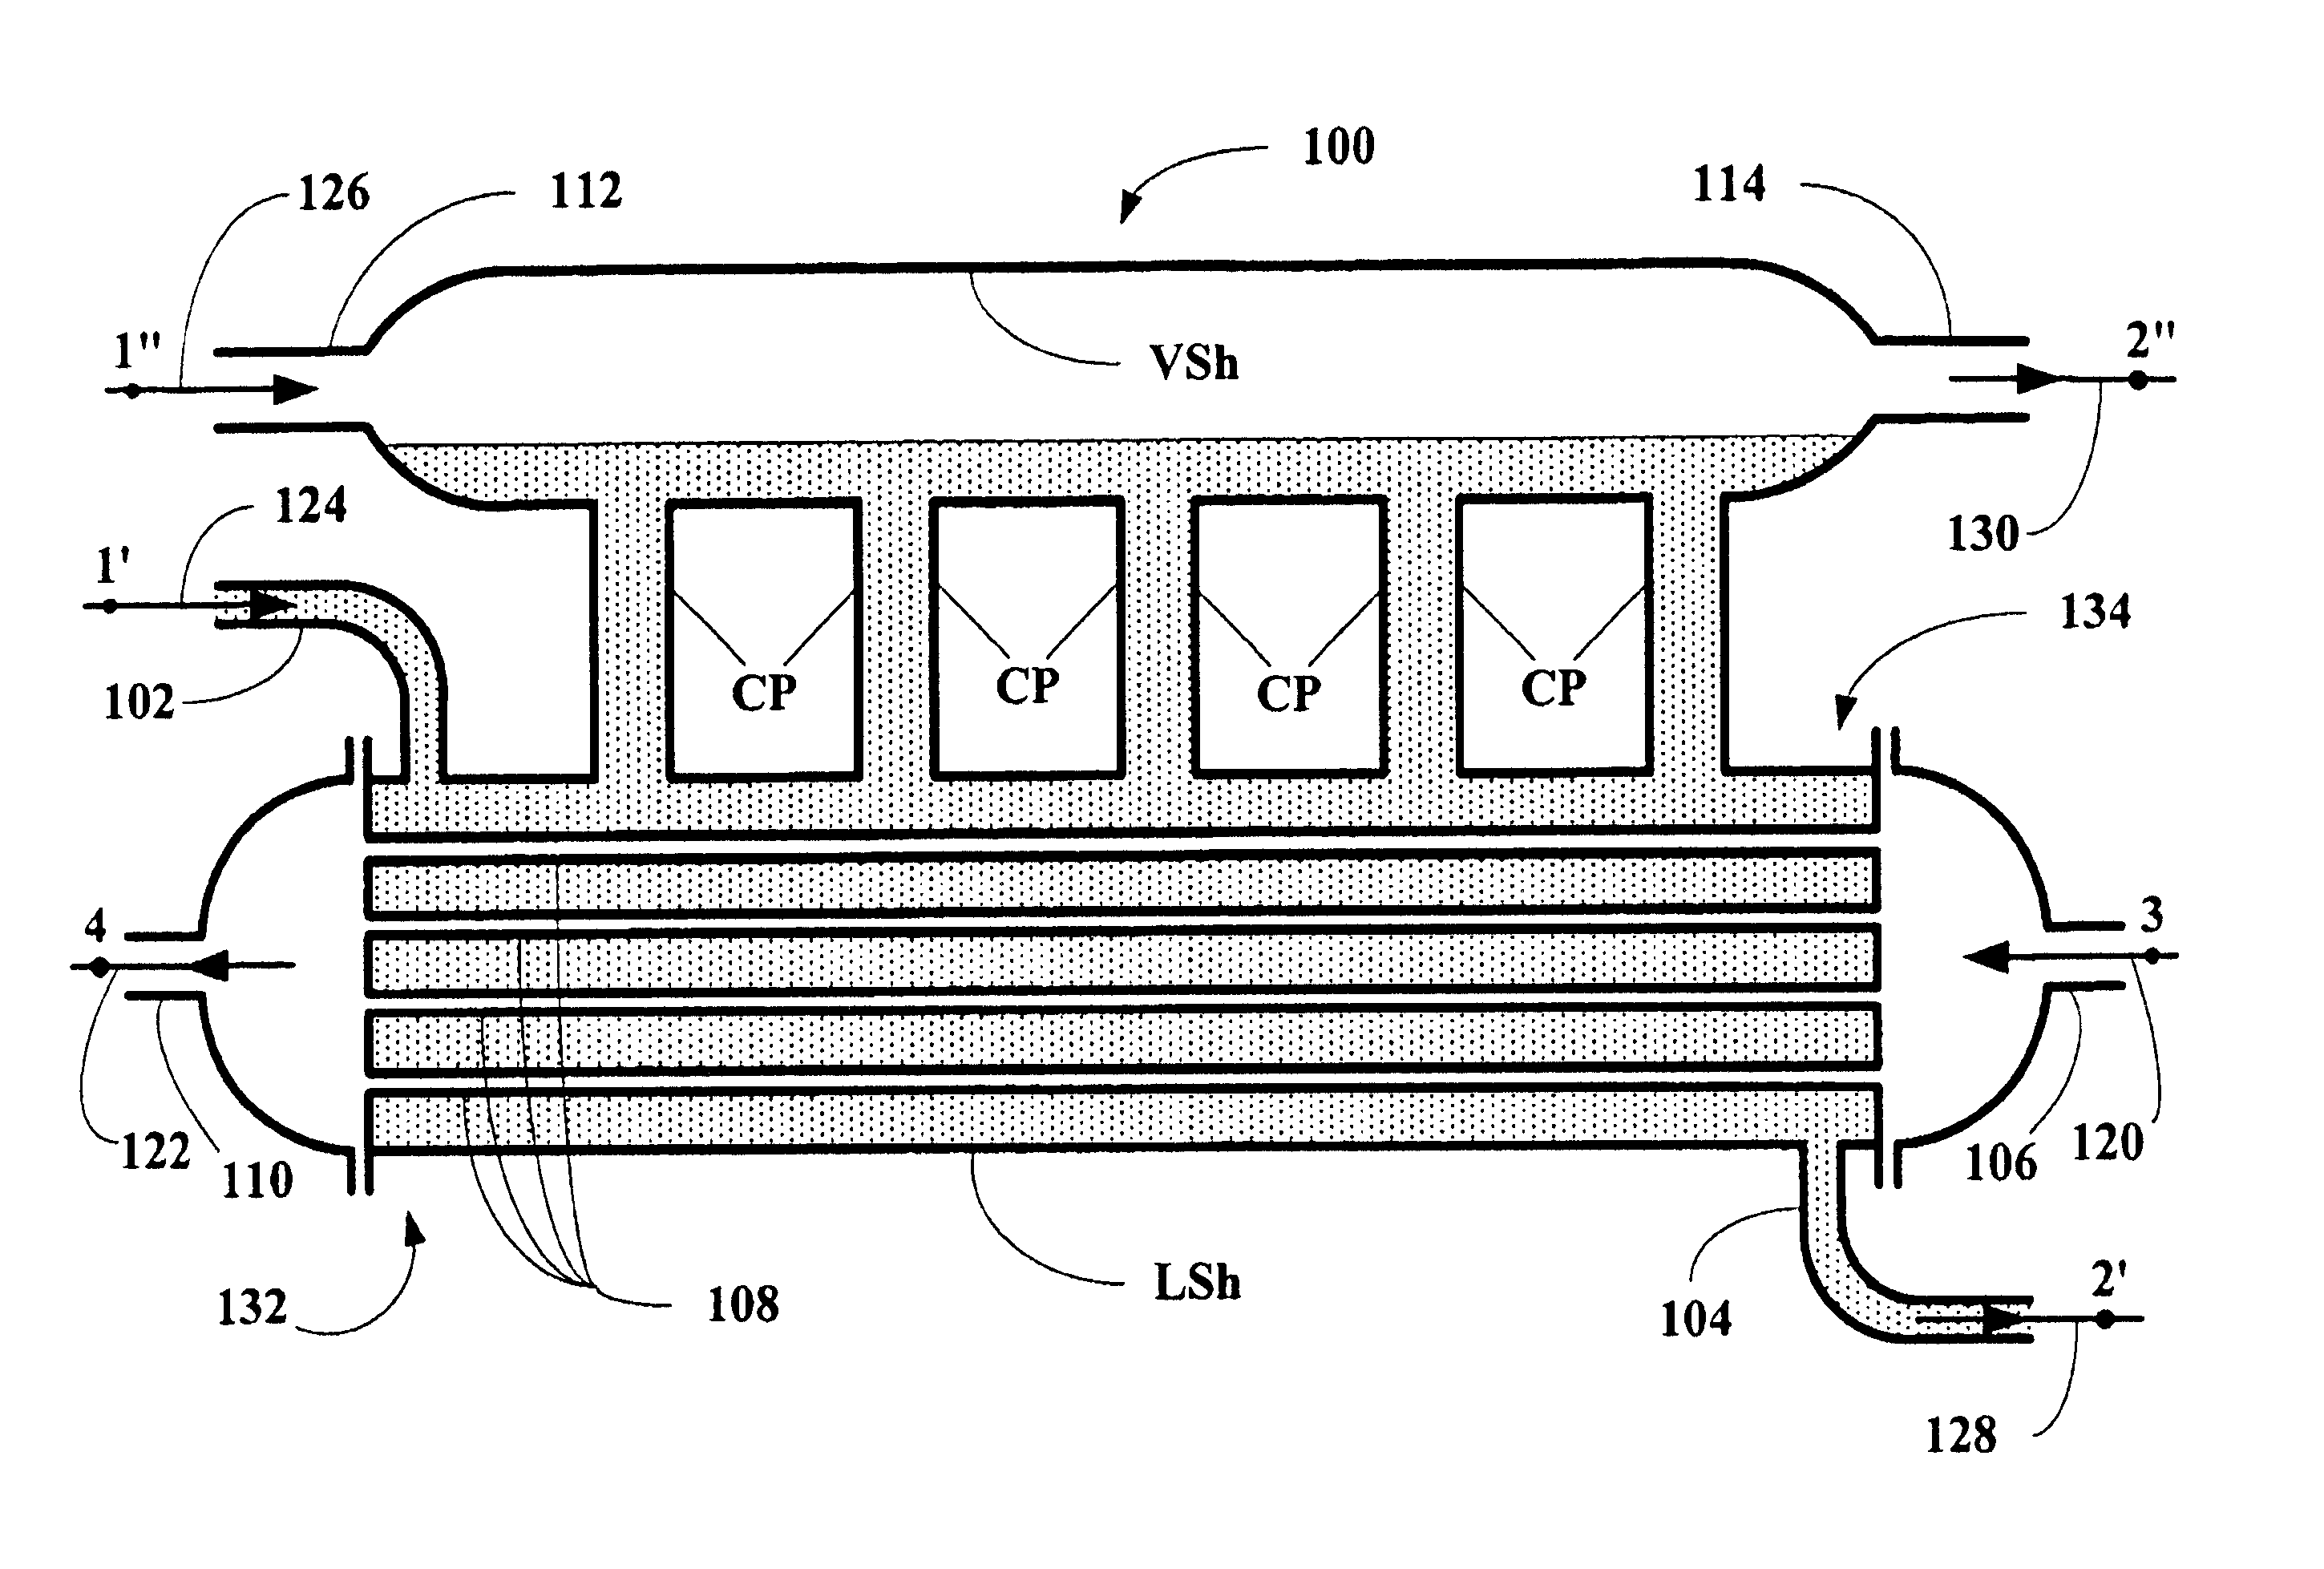 Process and apparatus for boiling and vaporizing multi-component fluids